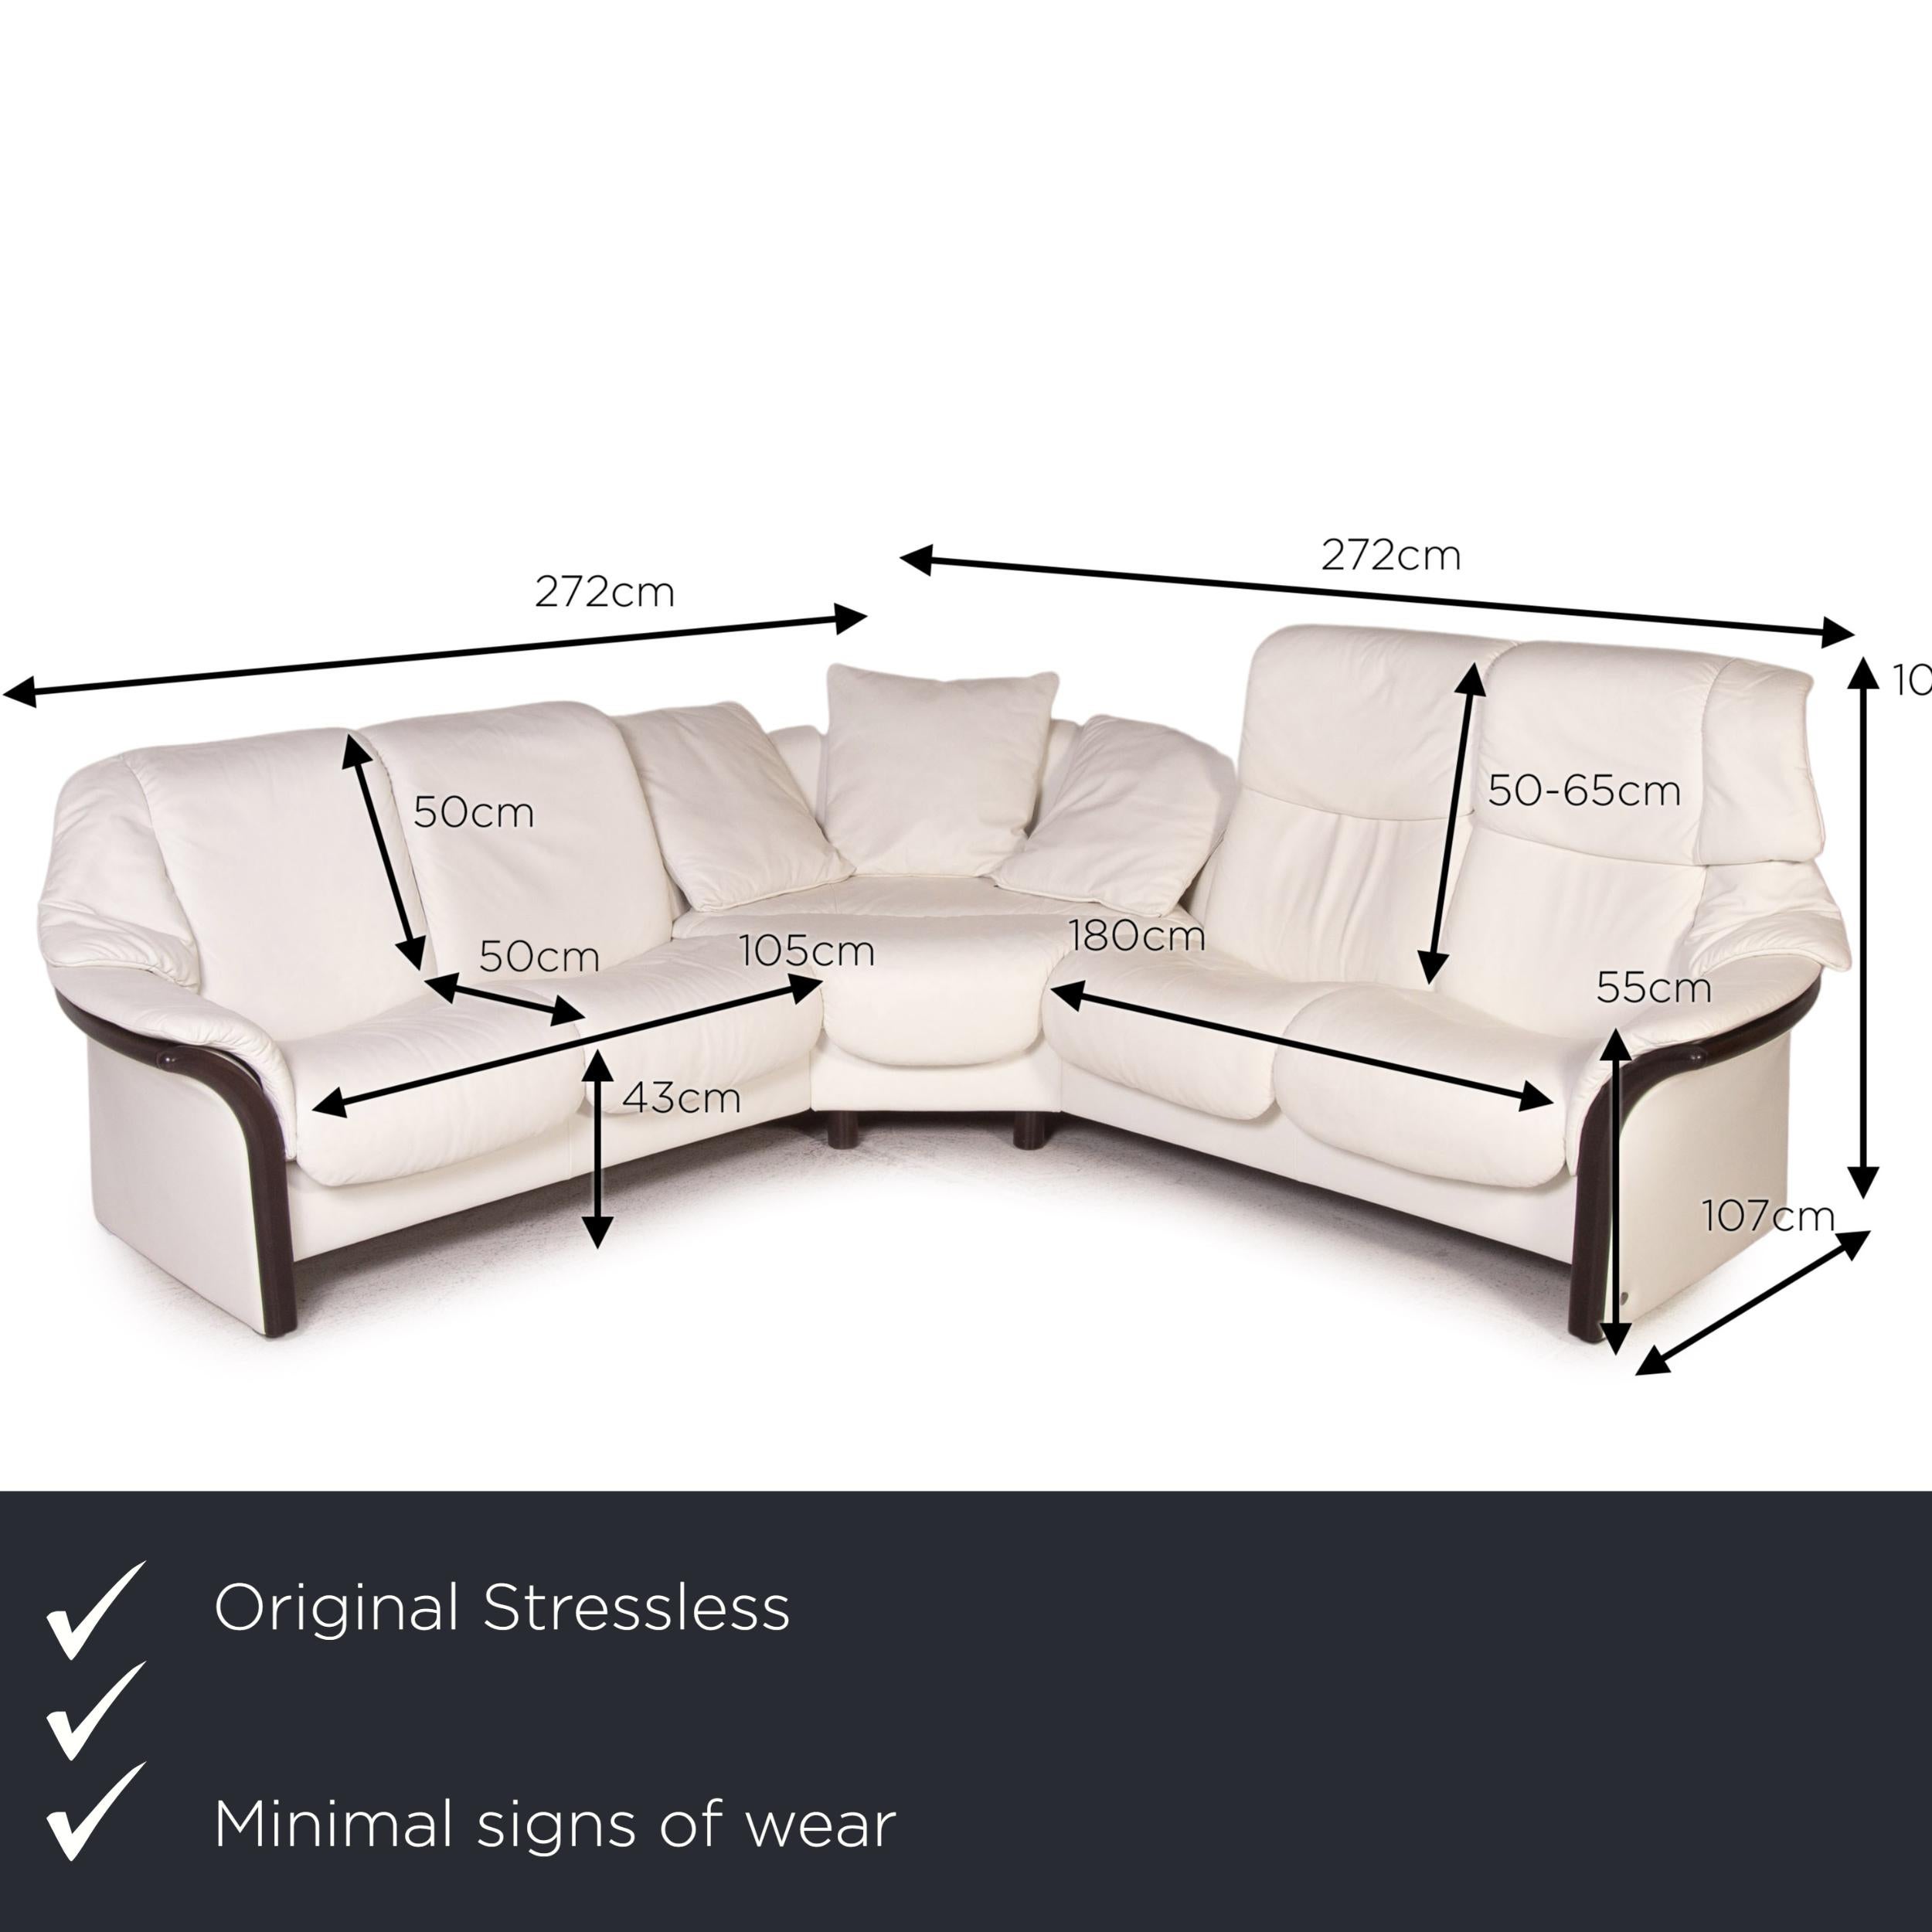 We present to you a Stressless Eldorado leather corner sofa white relax function sofa couch.

Product measurements in centimeters:

Depth: 107
Width: 272
Height: 100
Seat height: 43
Rest height: 55
Seat depth: 50
Seat width: 105
Back